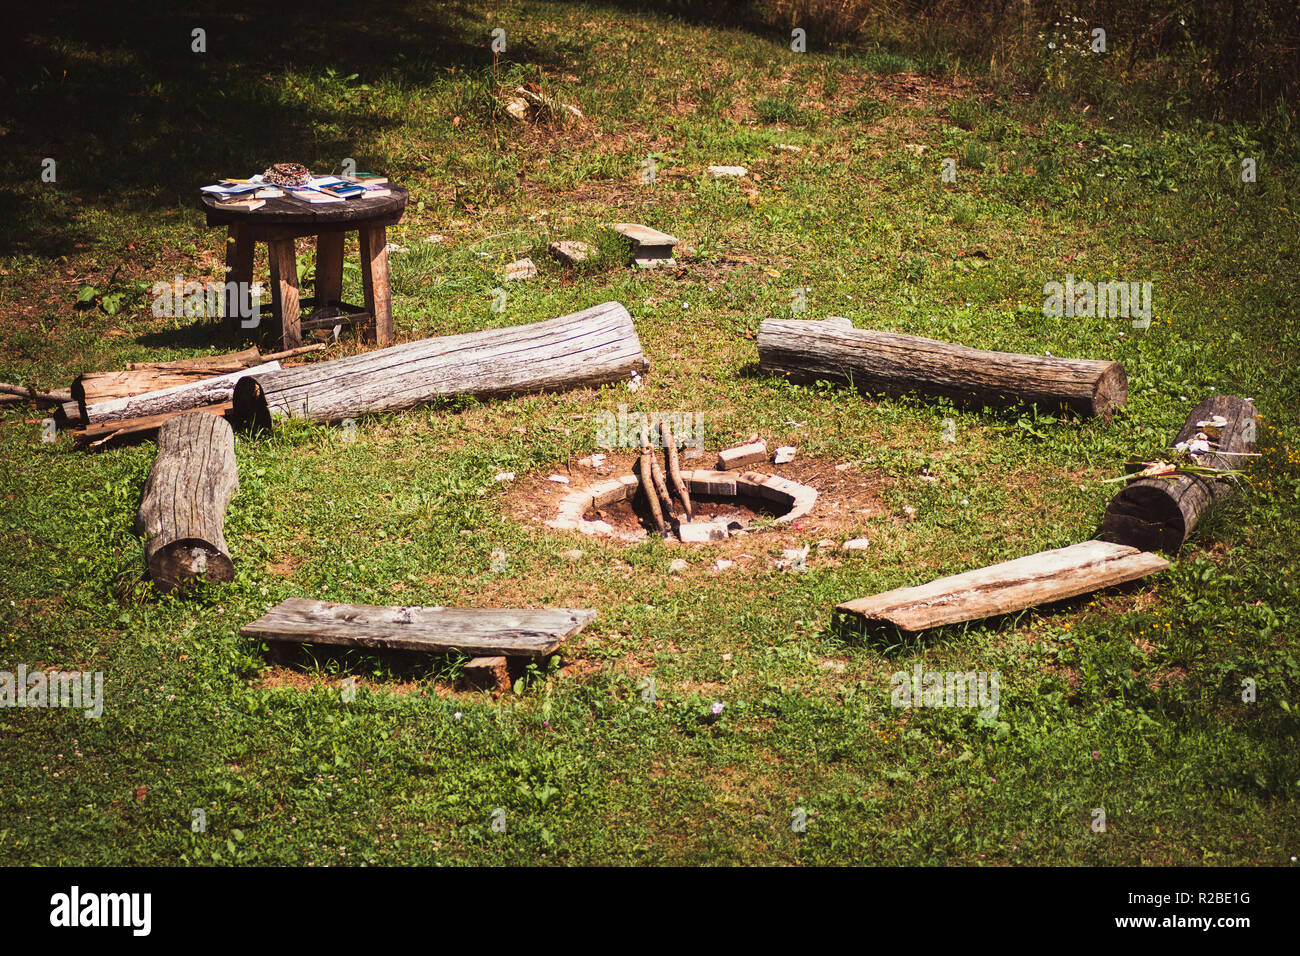 A fire pit and round seating area. Stock Photo